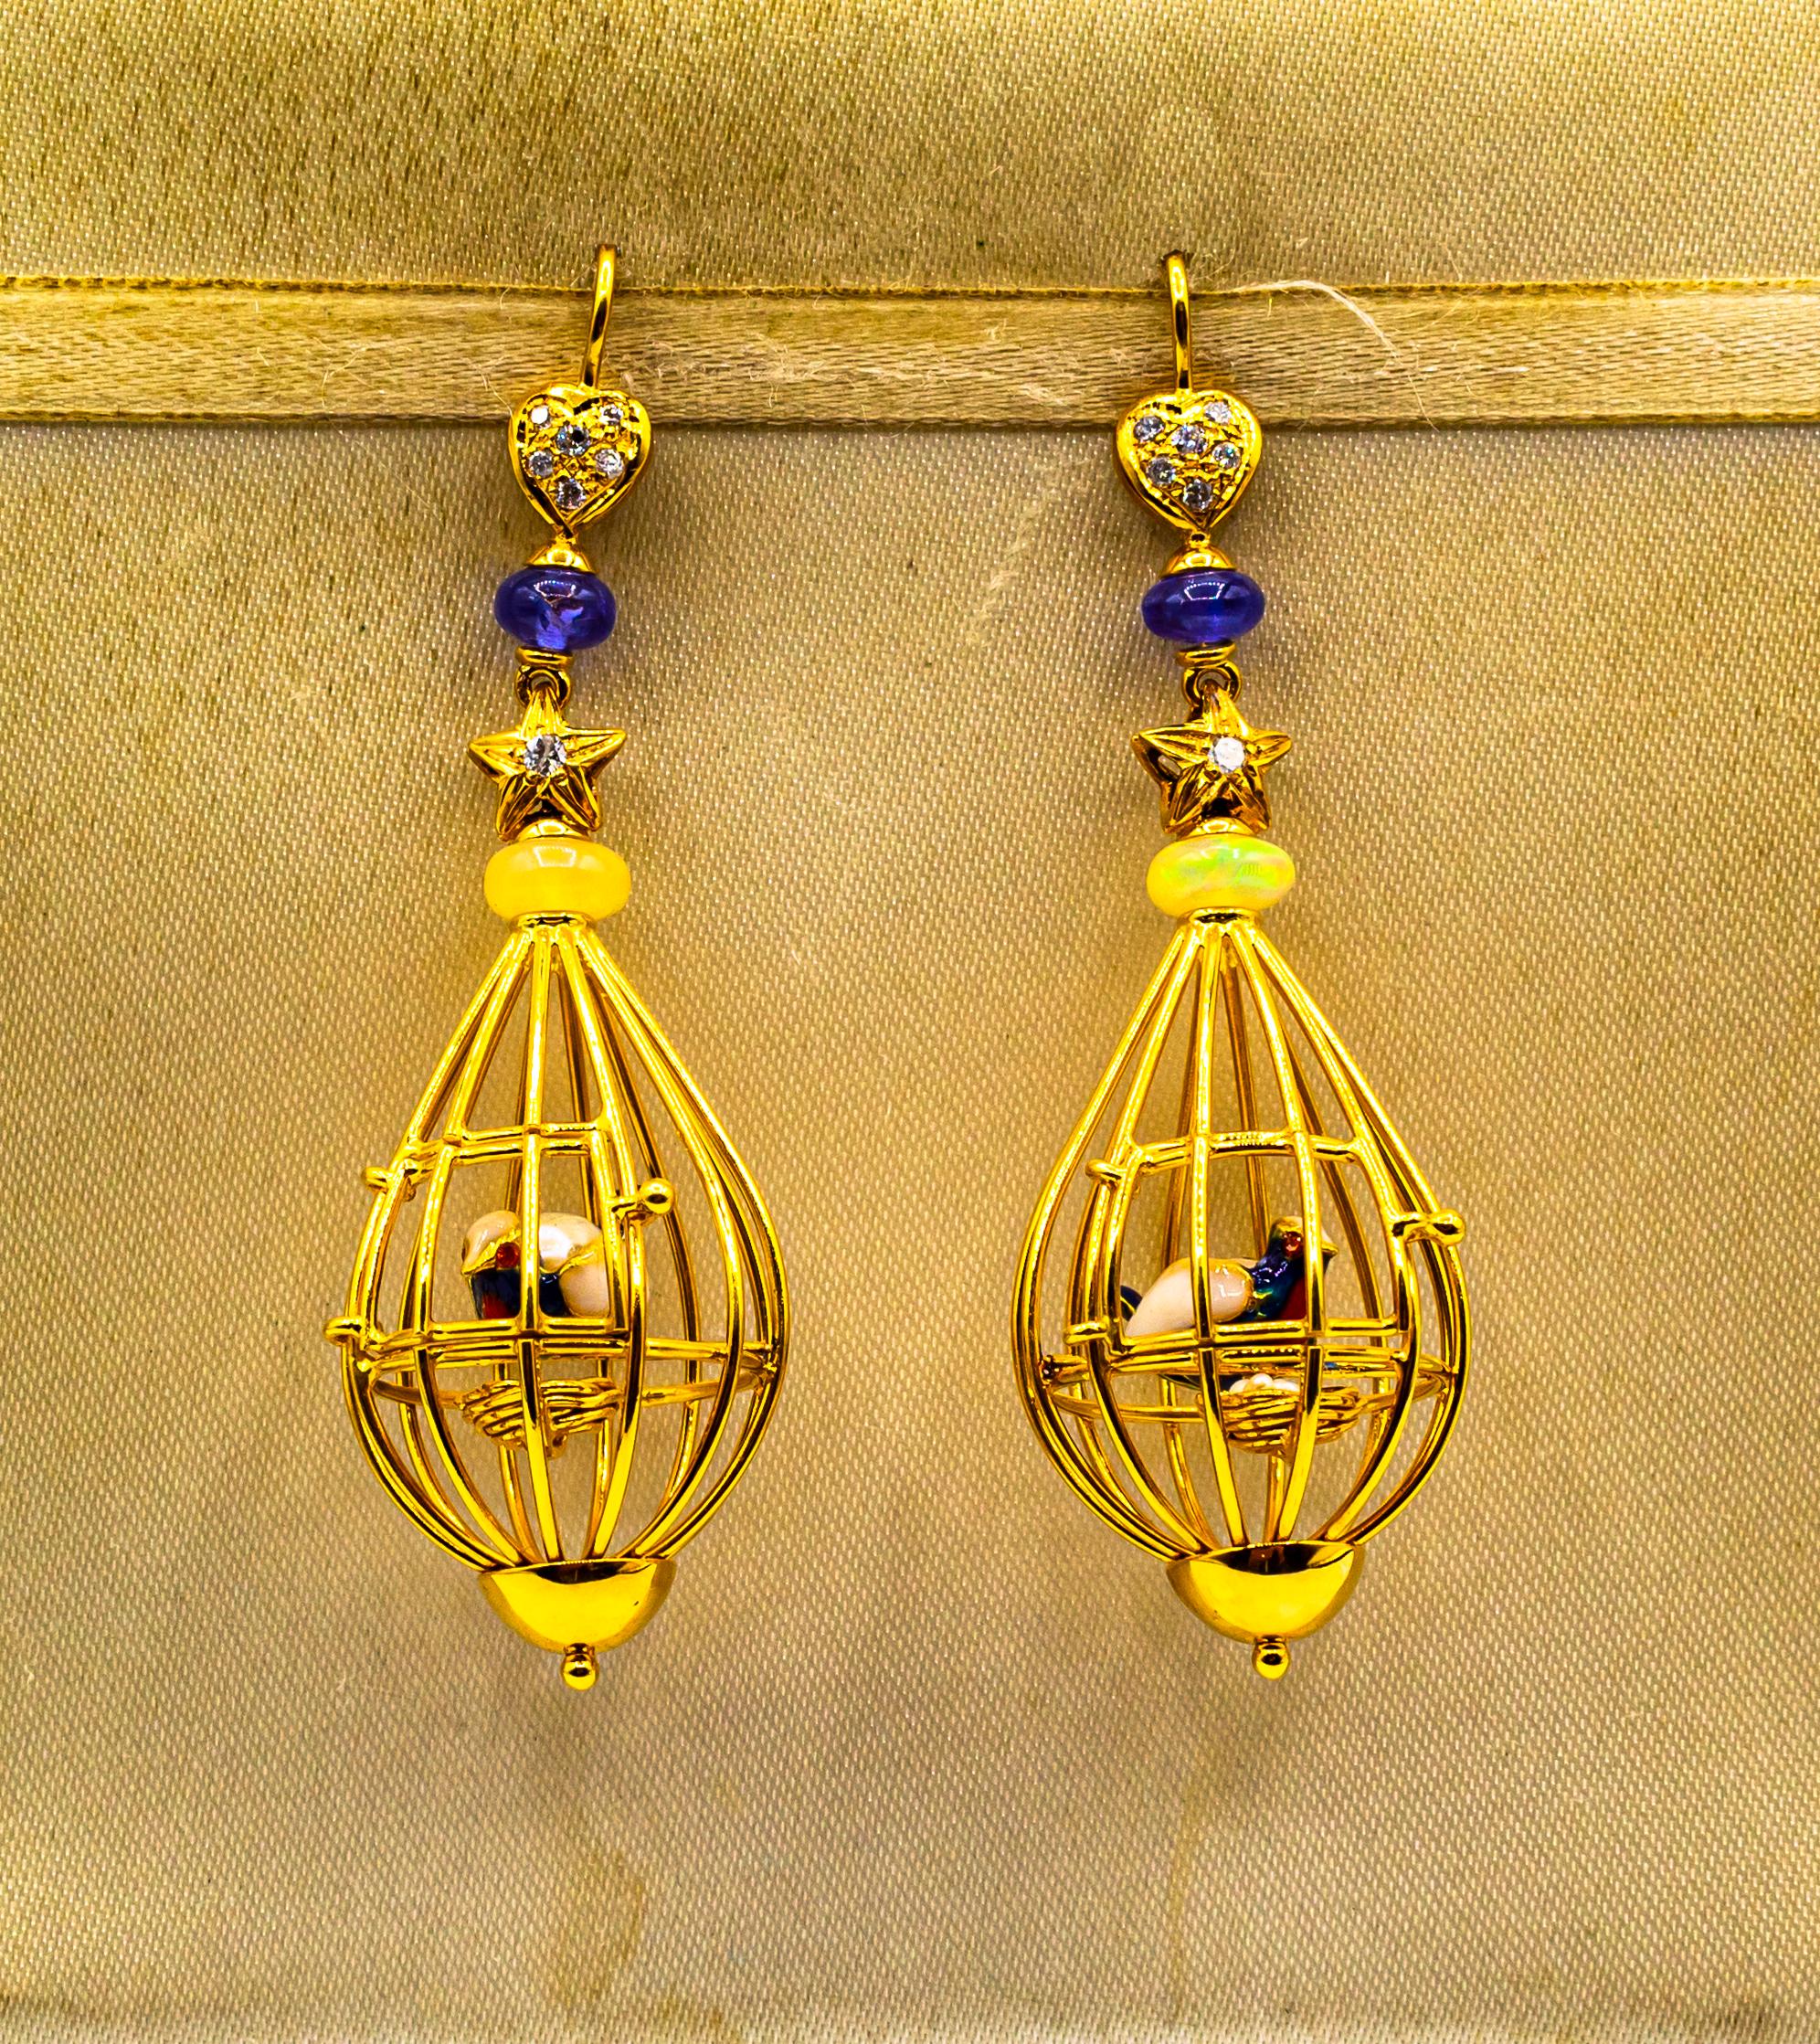 These Stud Earrings are made of 9K Yellow Gold.
These Earrings have 0.20 Carats of White Brilliant Cut Diamonds.
These Earrings have Tanzanite and Opal.
These Earrings have also Enamel and Pearls.

All our Earrings have pins for pierced ears but we